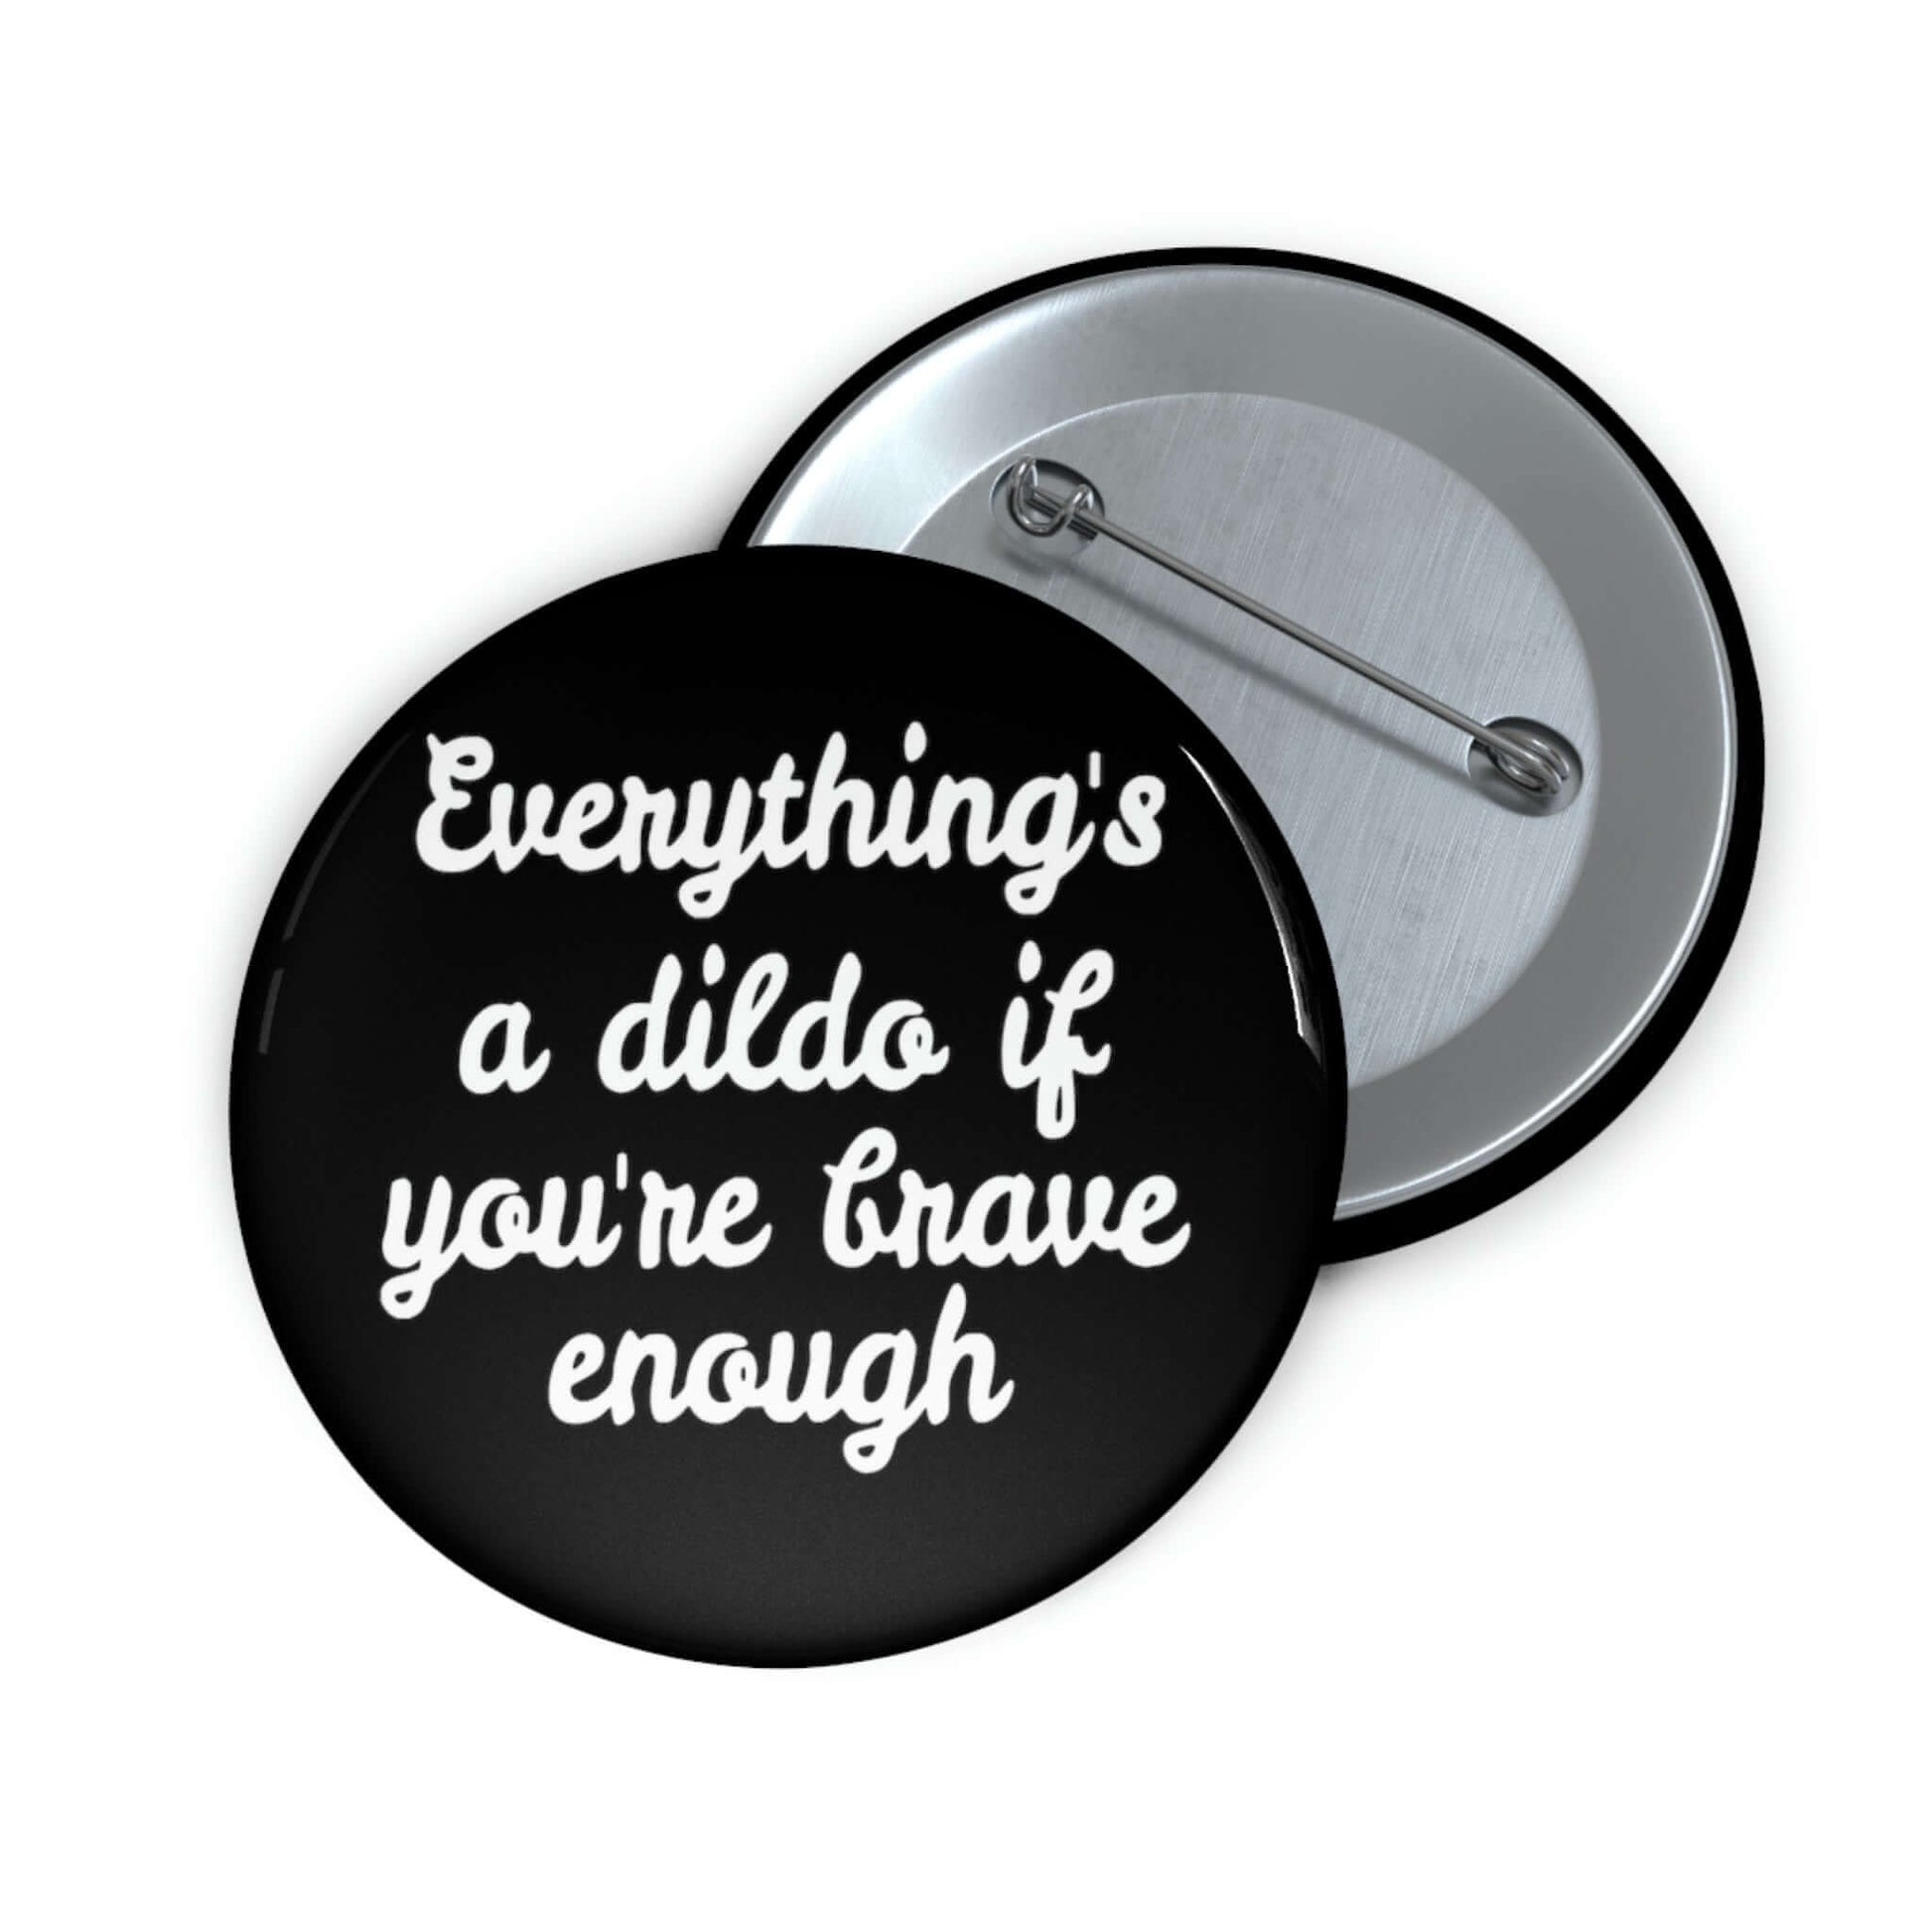 Black pinback button that says Everything's a dildo if you're brave enough.